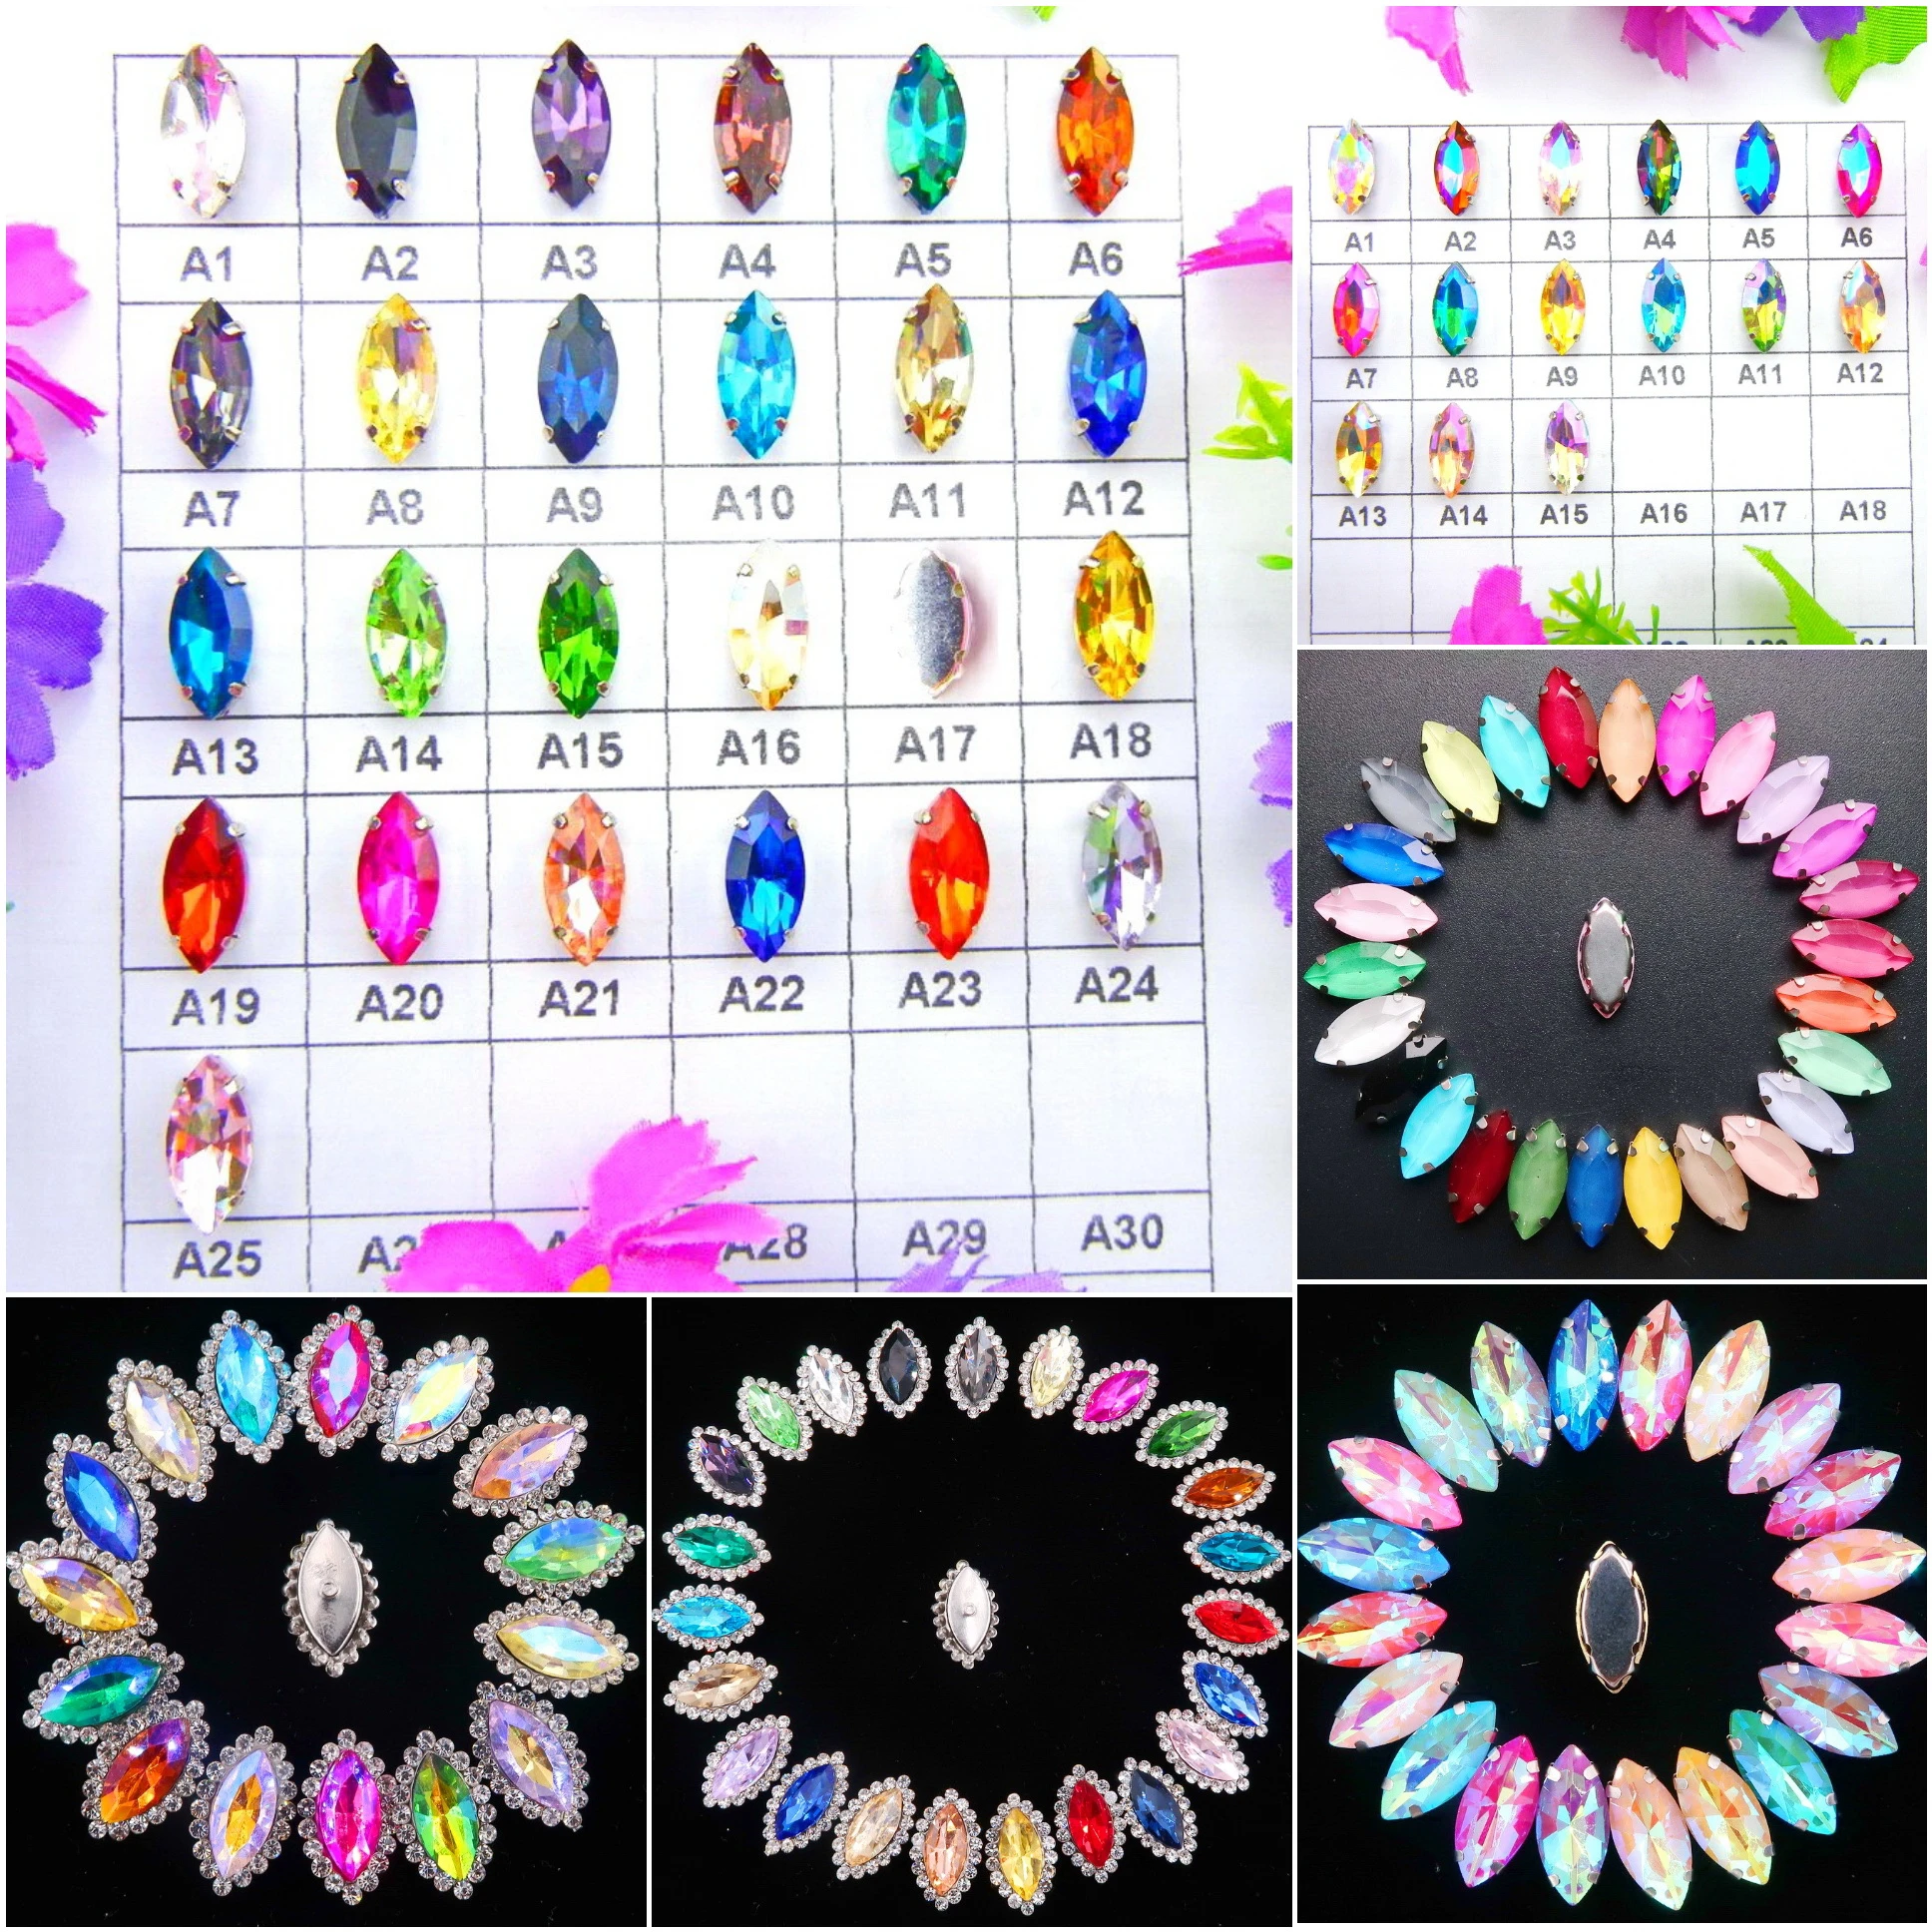 Glass Crystal Silver claw settings 8 sizes nice colors horse eye Navette Marquise shape Sew on rhinestone beads appliques diy